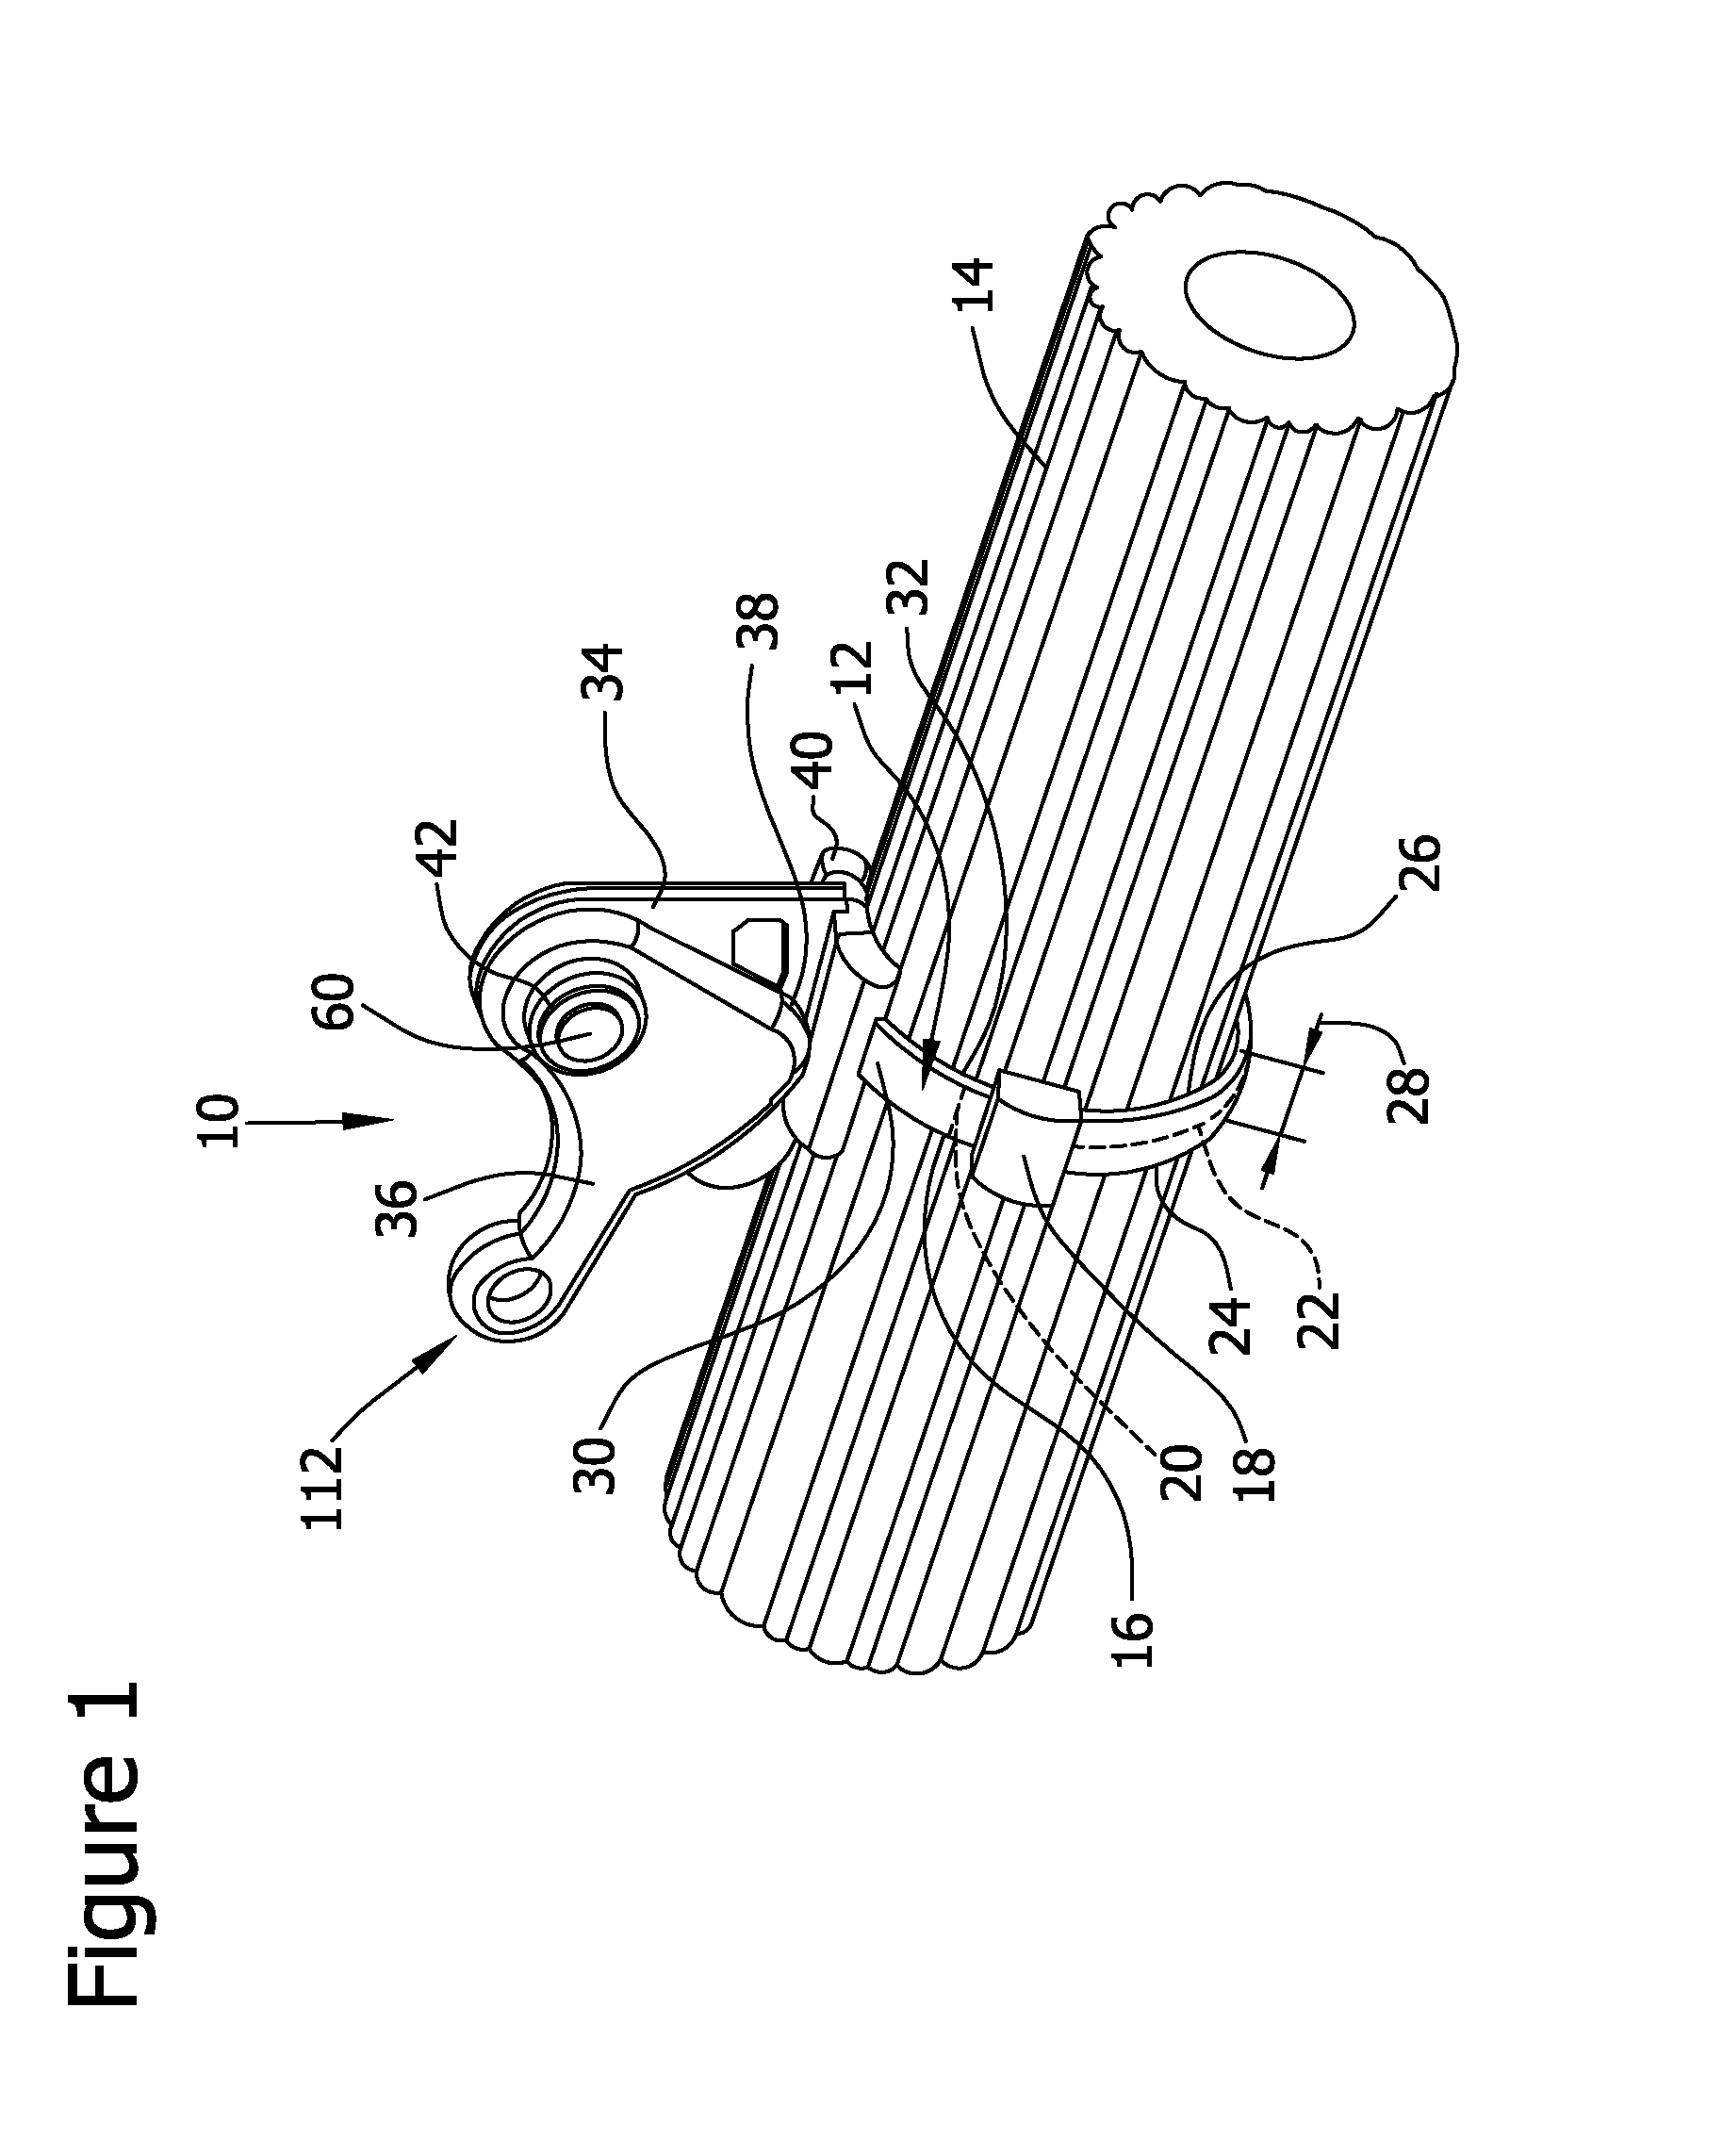 Cutting tool and method of operating same